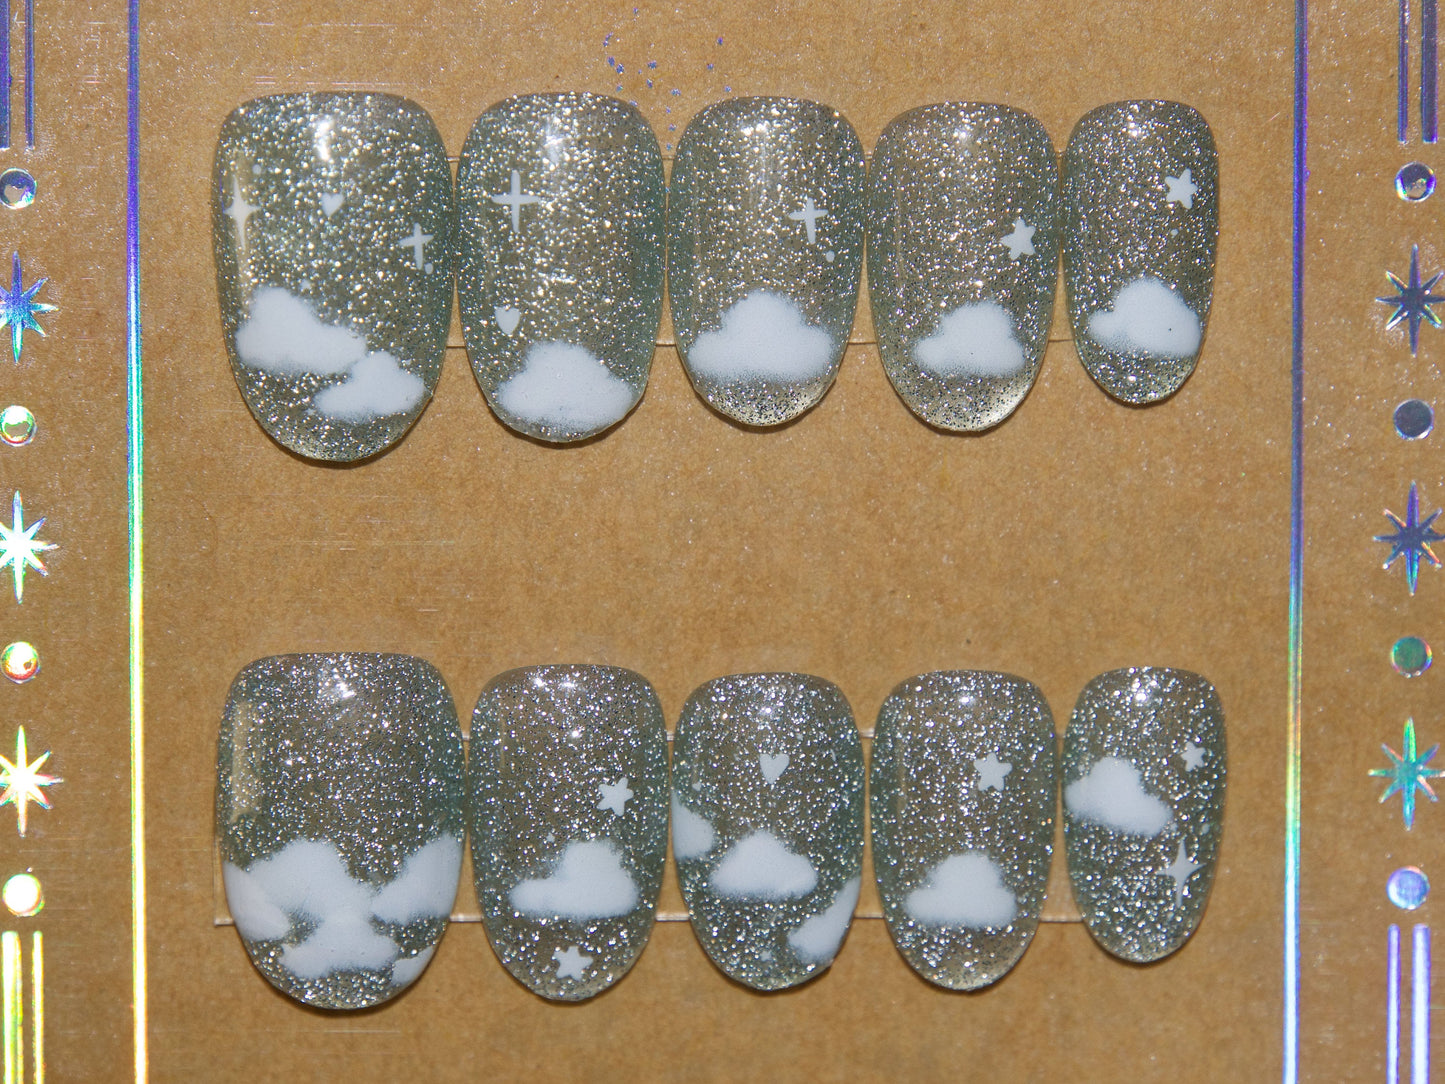 White Clouds with Green Reflective Glitter Sparkling Nails Customized Personalized Press on Nail